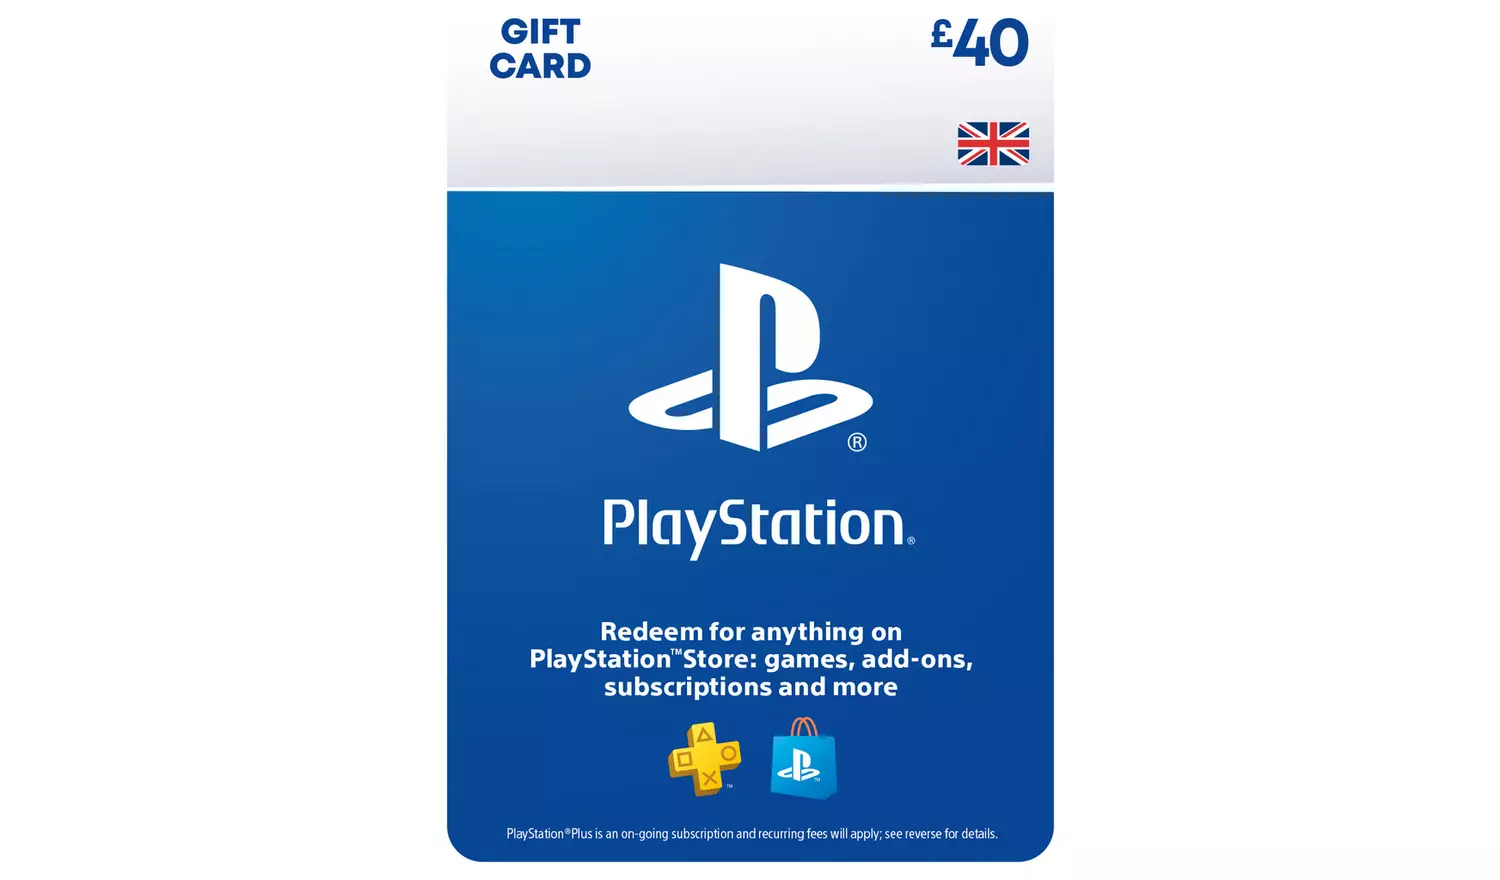 PlayStation Store 40 GBP Gift Card